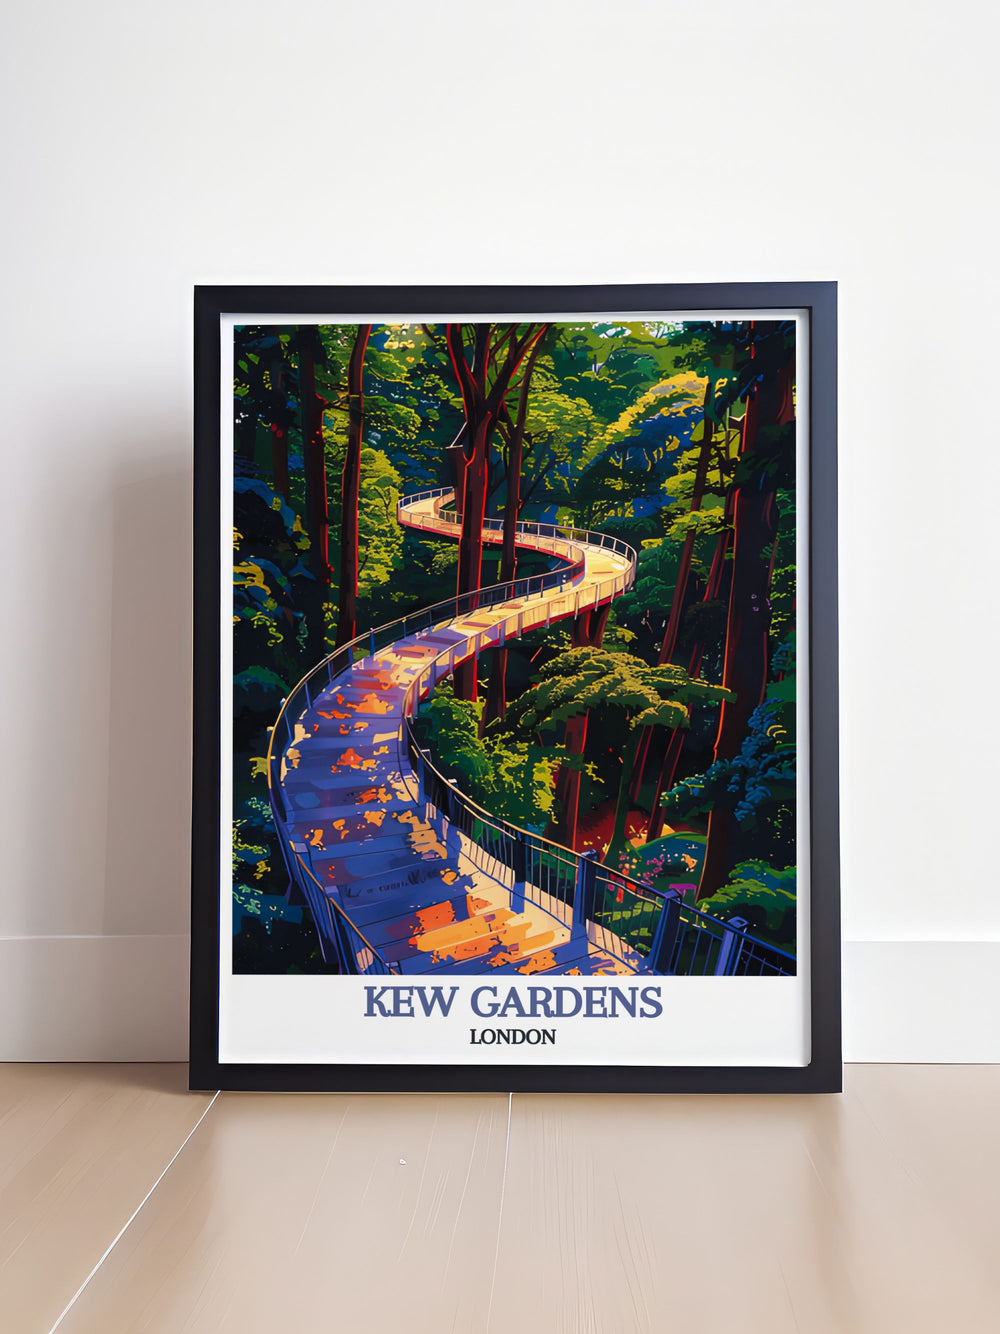 Showcasing Englands horticultural excellence, this poster depicts iconic gardens and lush landscapes. Perfect for nature lovers and travelers, this artwork offers a glimpse into the timeless beauty of Englands botanical treasures.